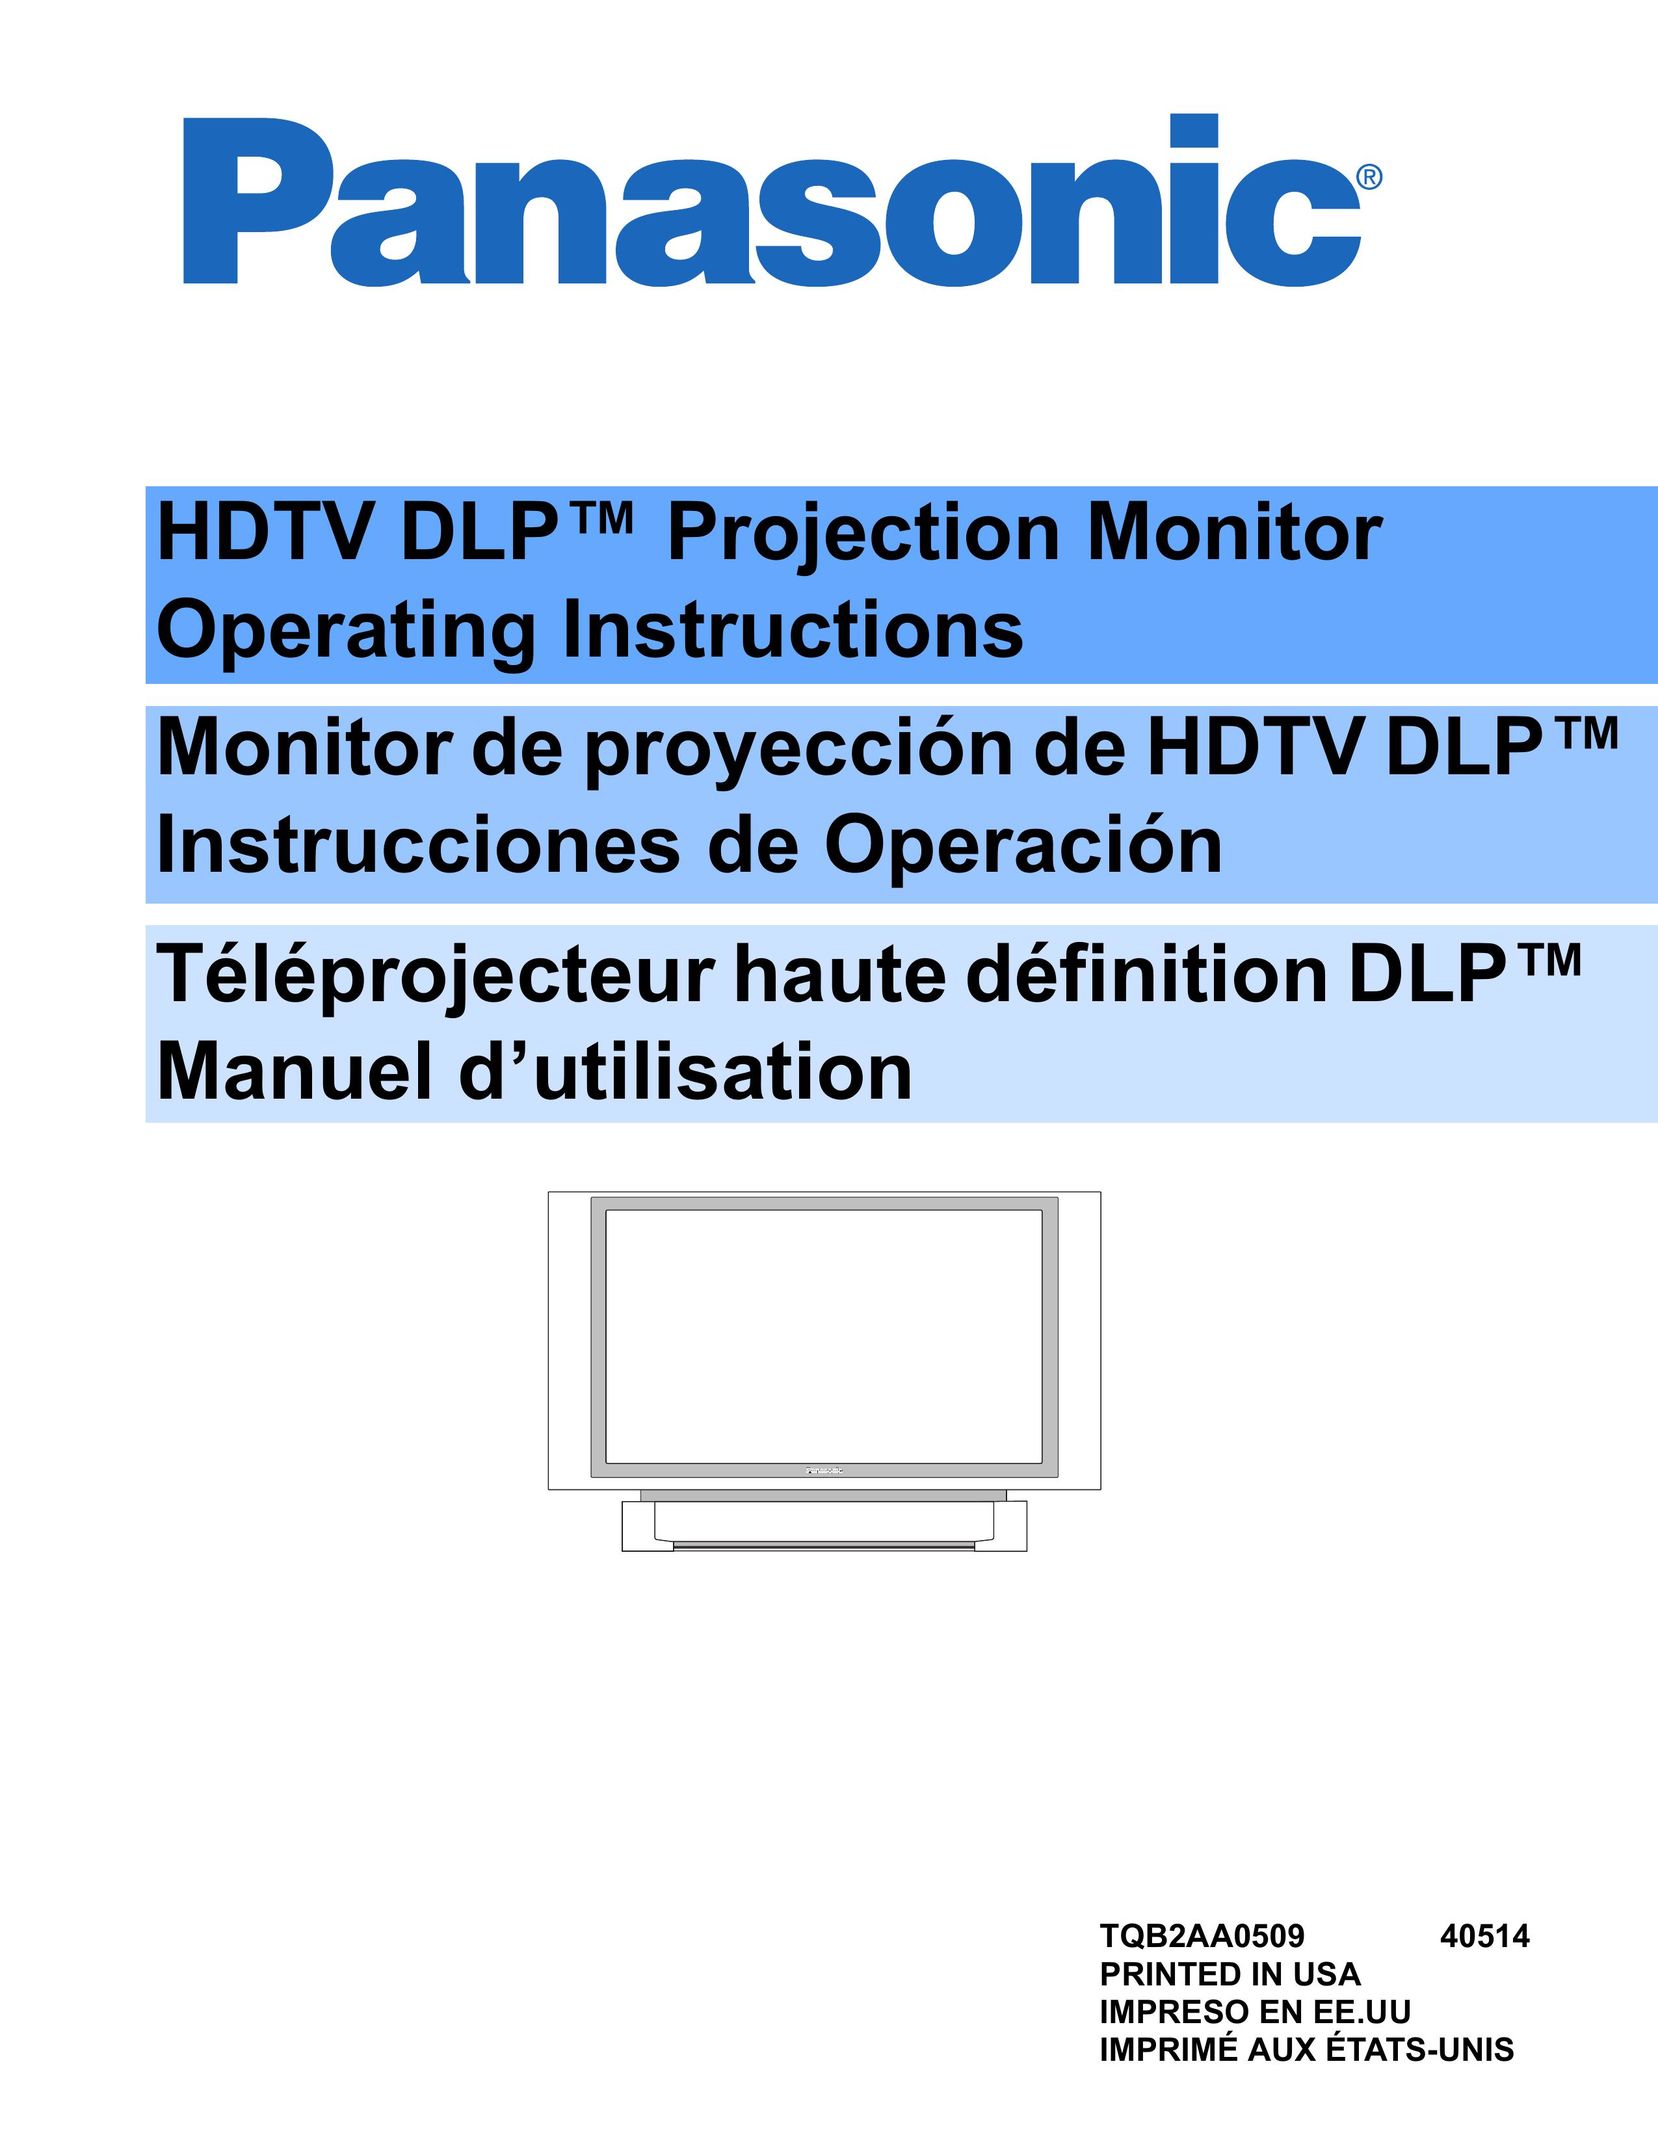 Panasonic PT 60DL54 Projection Television User Manual